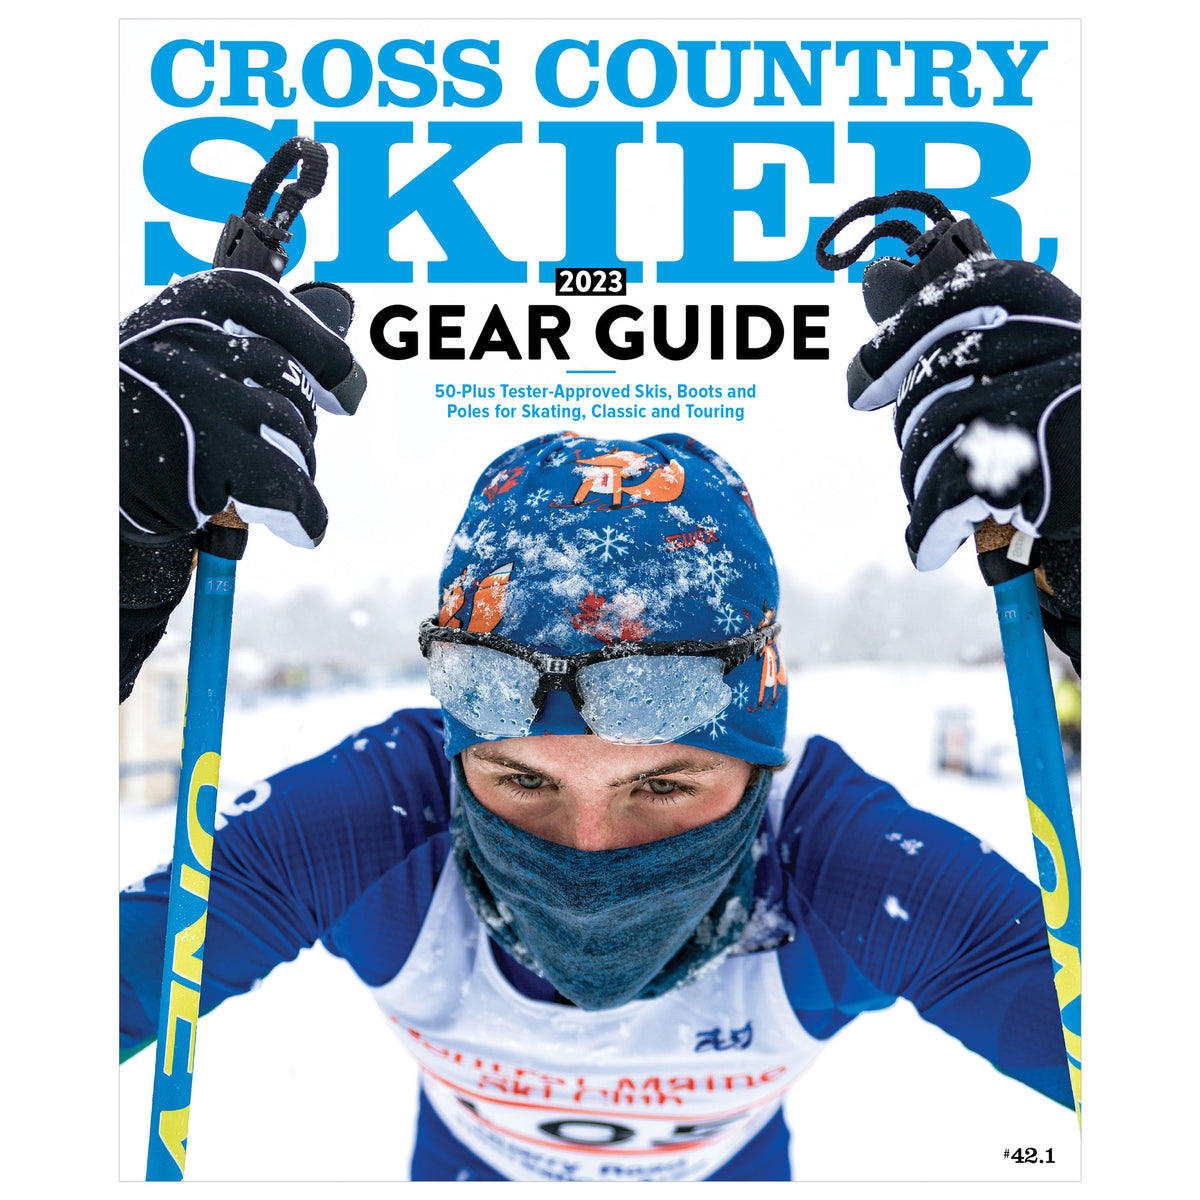 The Vision Collection - best-seller technical competition wear for  cross-country skiing